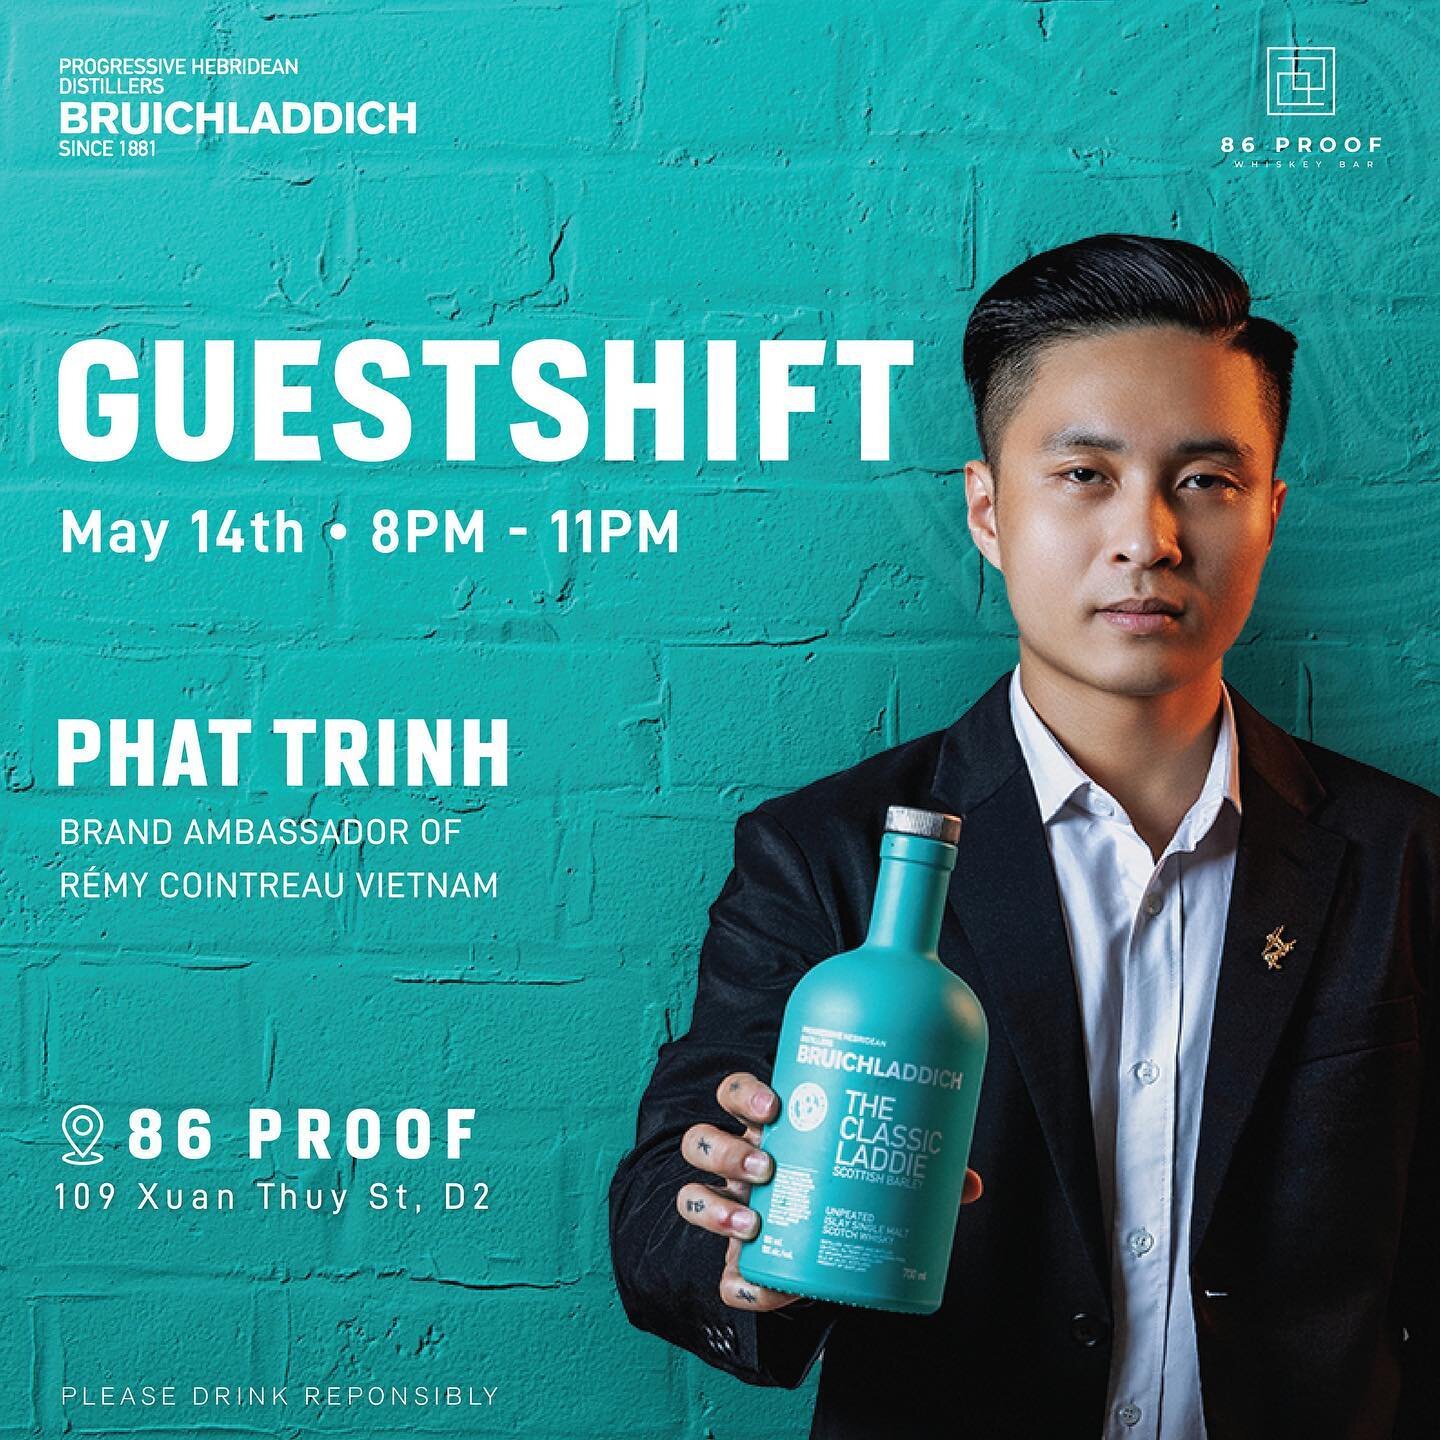 𝐁𝐑𝐔𝐈𝐂𝐇𝐋𝐀𝐃𝐃𝐈𝐂𝐇 𝐱 𝟖𝟔 𝐏𝐑𝐎𝐎𝐅 ft. Phat Trinh 

Join us tomorrow (Sunday, May 14) as Remy Cointreau's brand ambassador, Phat Trinh, takes over the 86 Proof bar. 

For one night only, Phat will be shaking up 3 signature Bruichladdich Cl